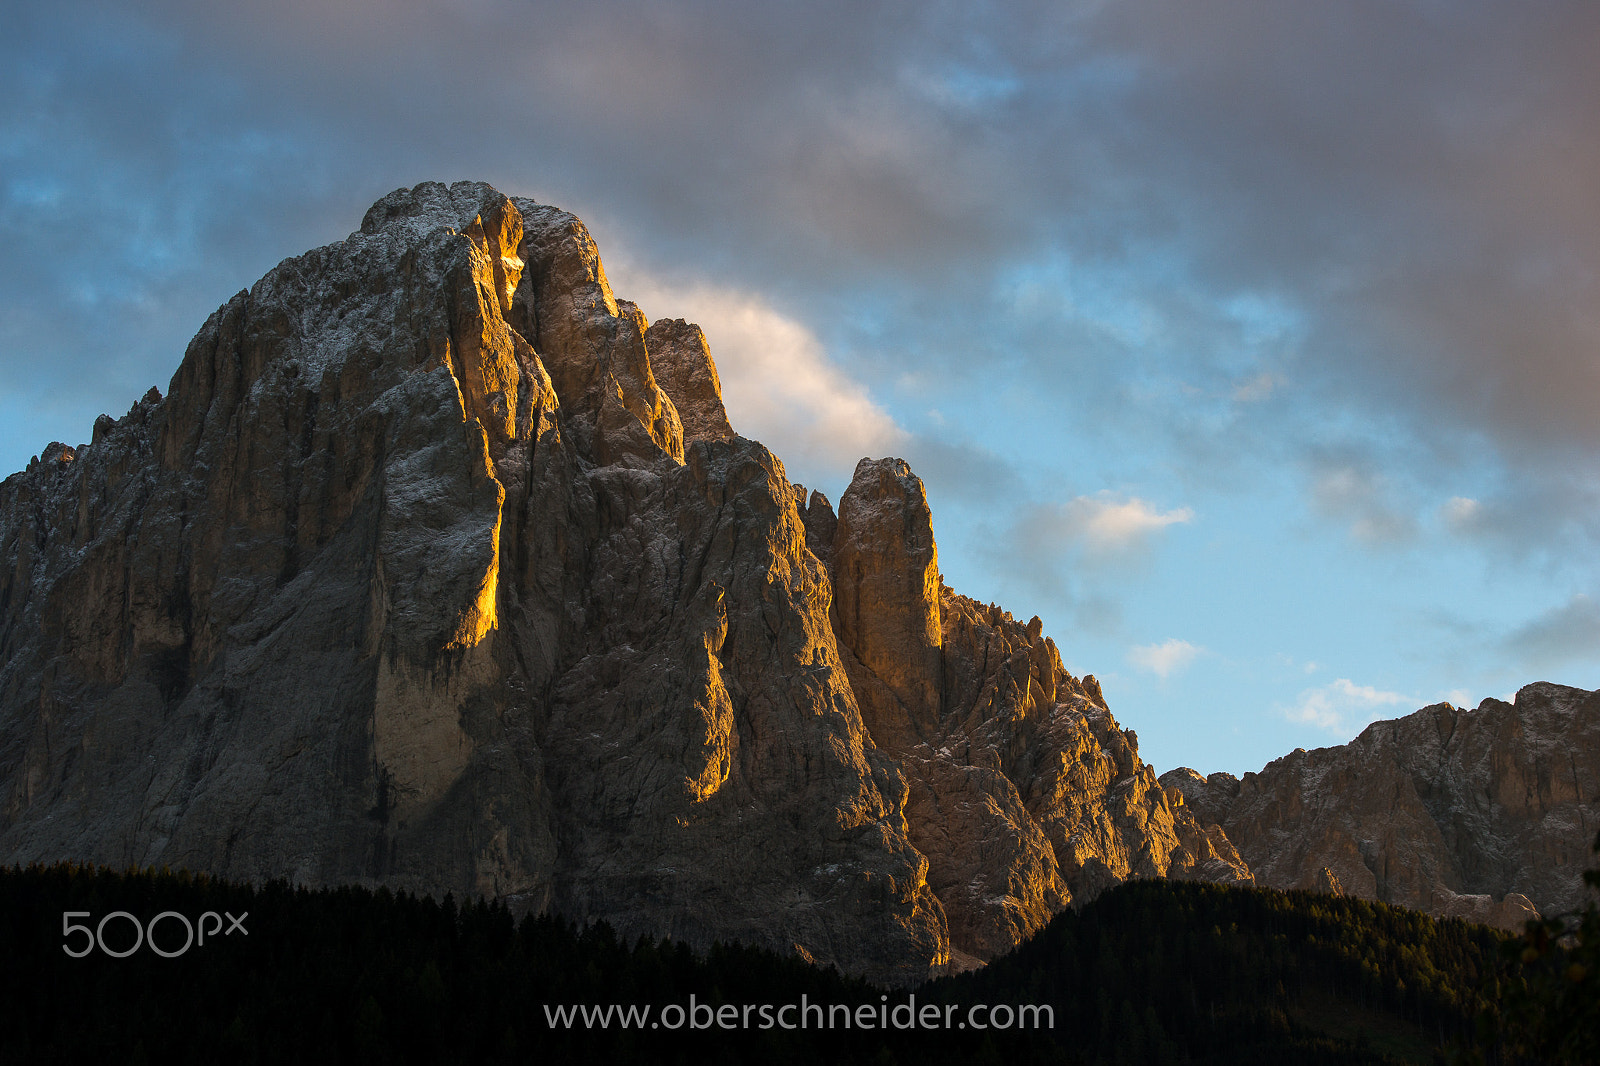 Sony a99 II + Tamron SP 70-200mm F2.8 Di VC USD sample photo. Sassolungo / langkofel in the last light of the day photography